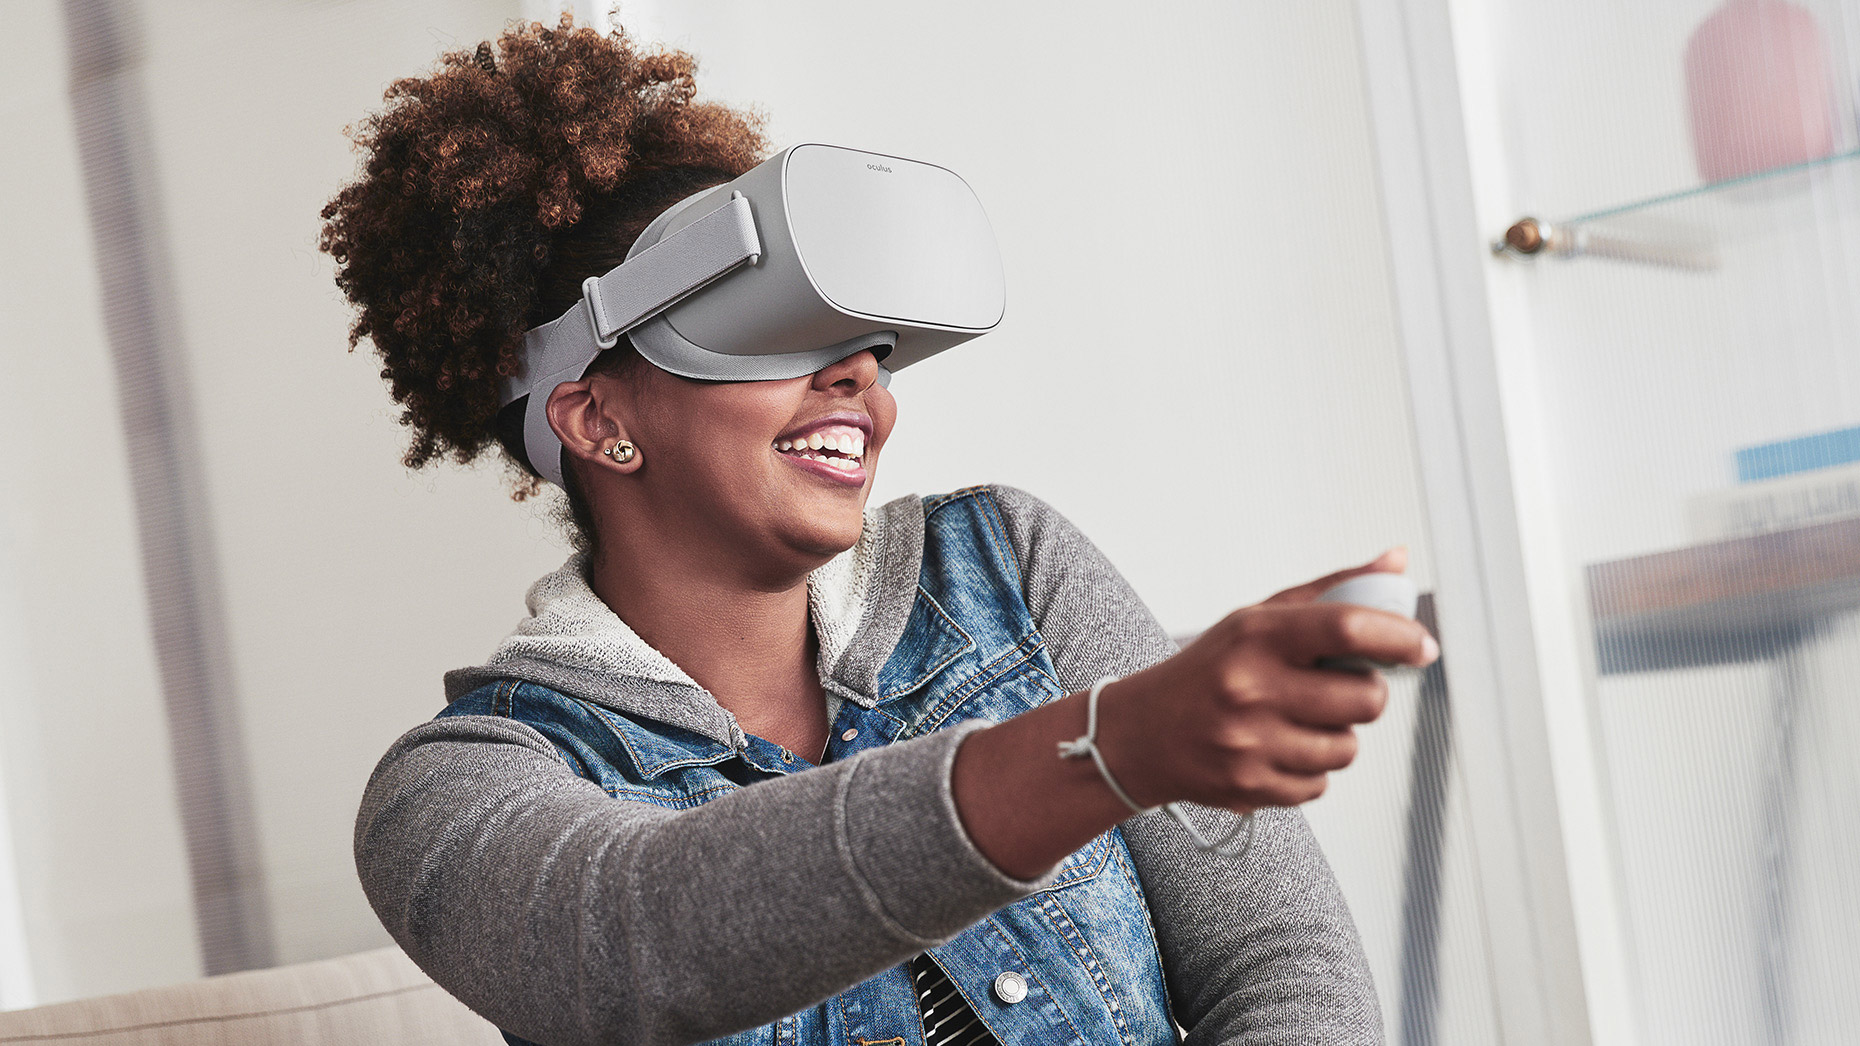 Top games with Oculus Go support 